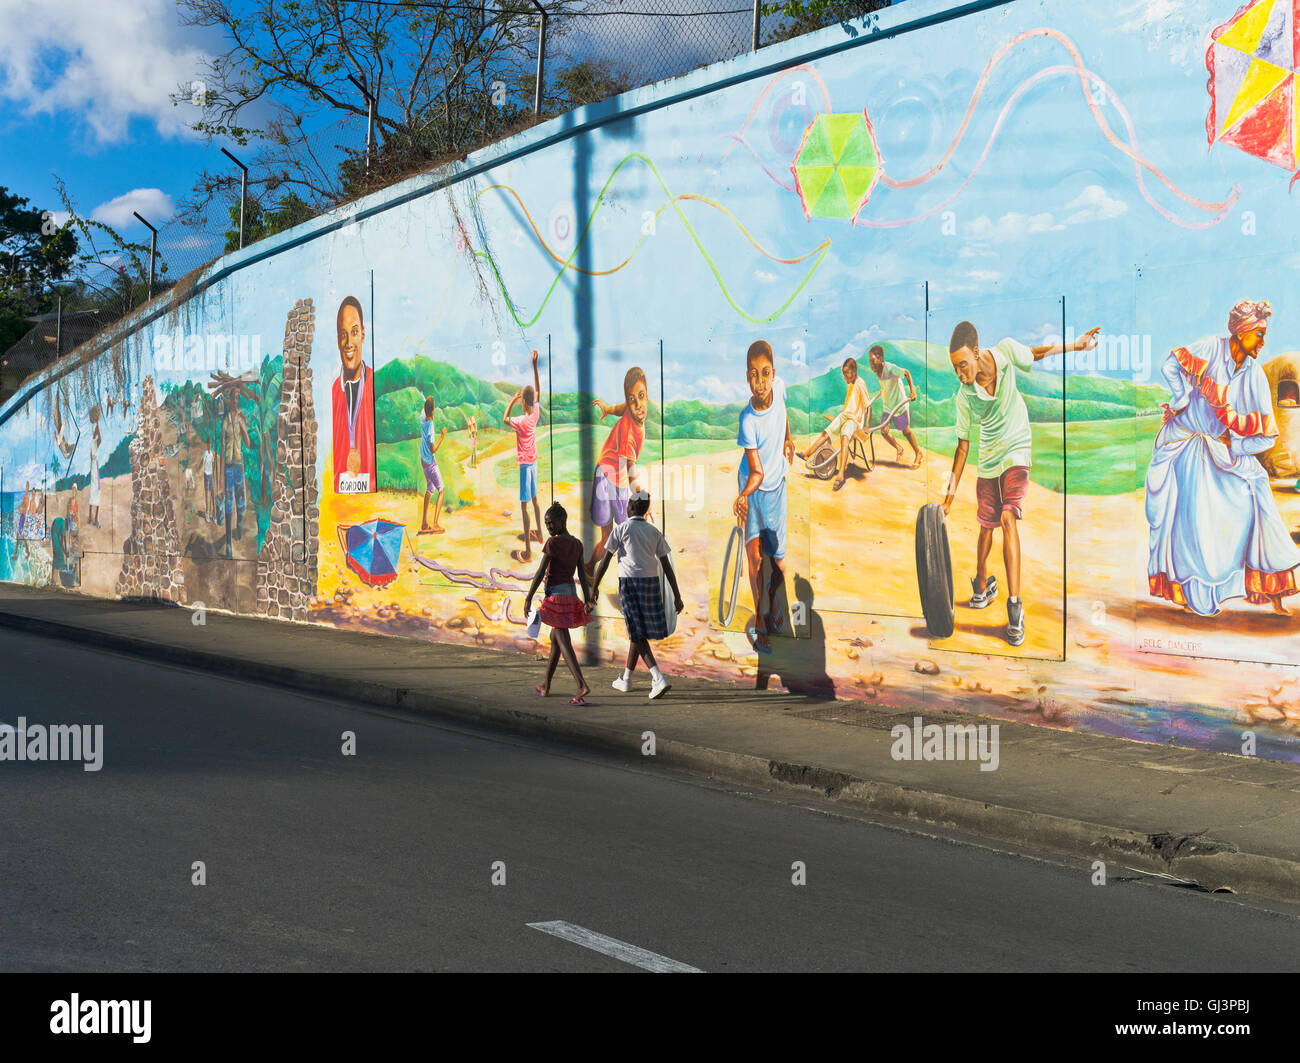 dh Scarborough street TOBAGO CARIBBEAN Two young girls walking by colourful painted wall murals mural art painting cultural paintings trinidad Stock Photo